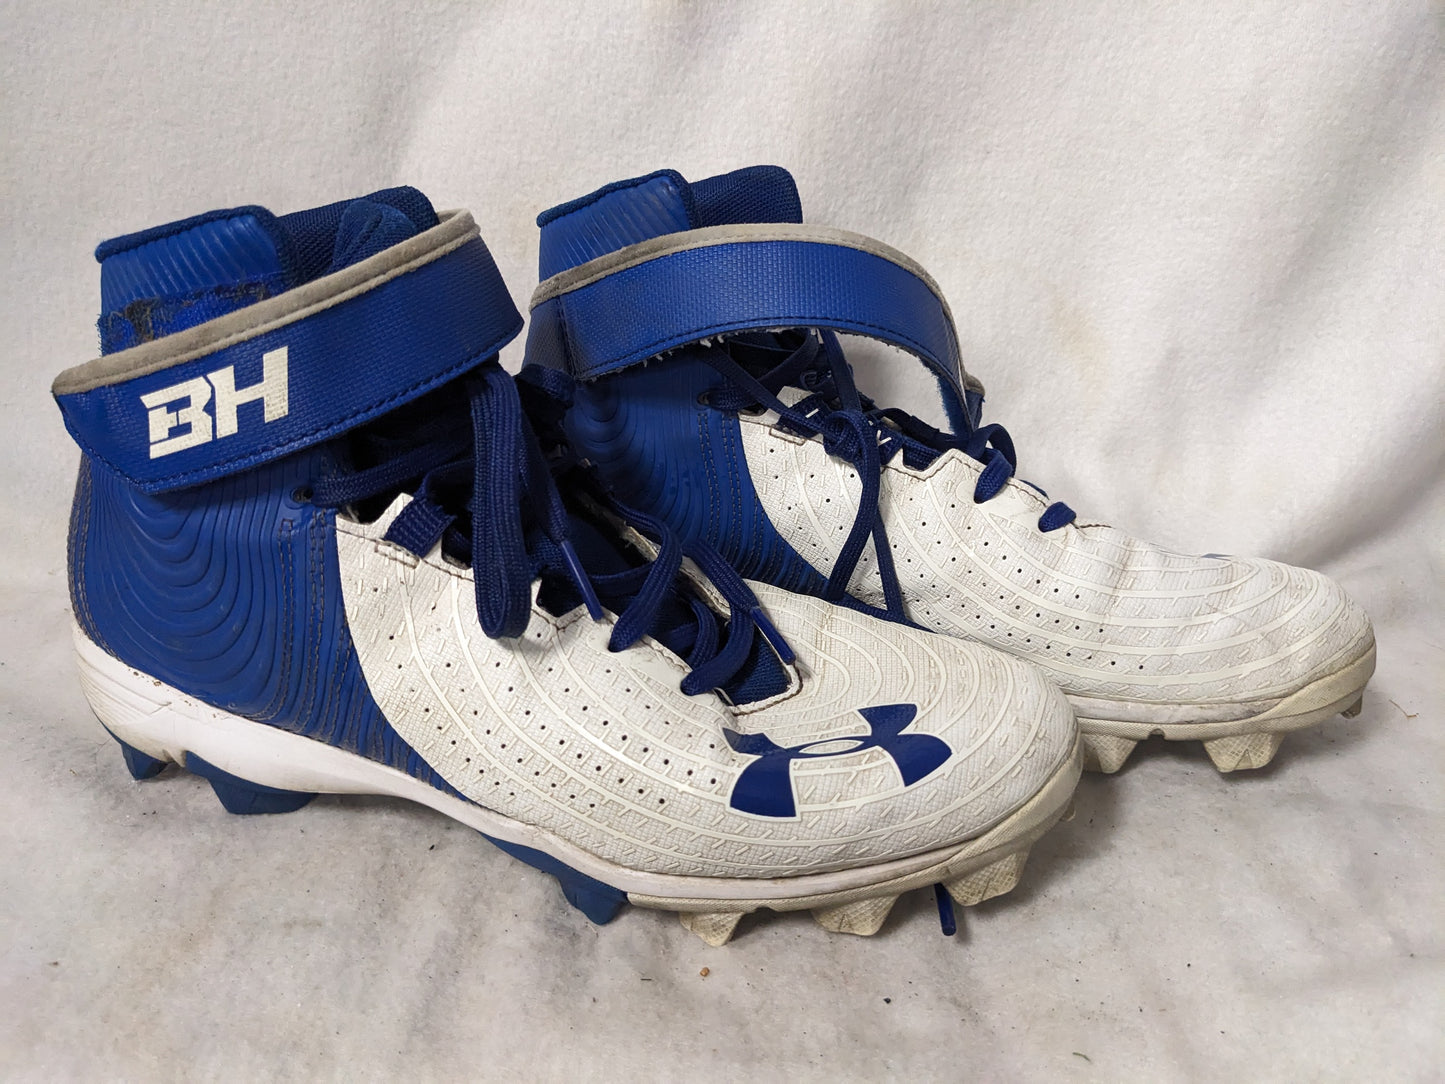 Under Armour High Top BH Cleats Size 7.5 Color Blue Condition Used